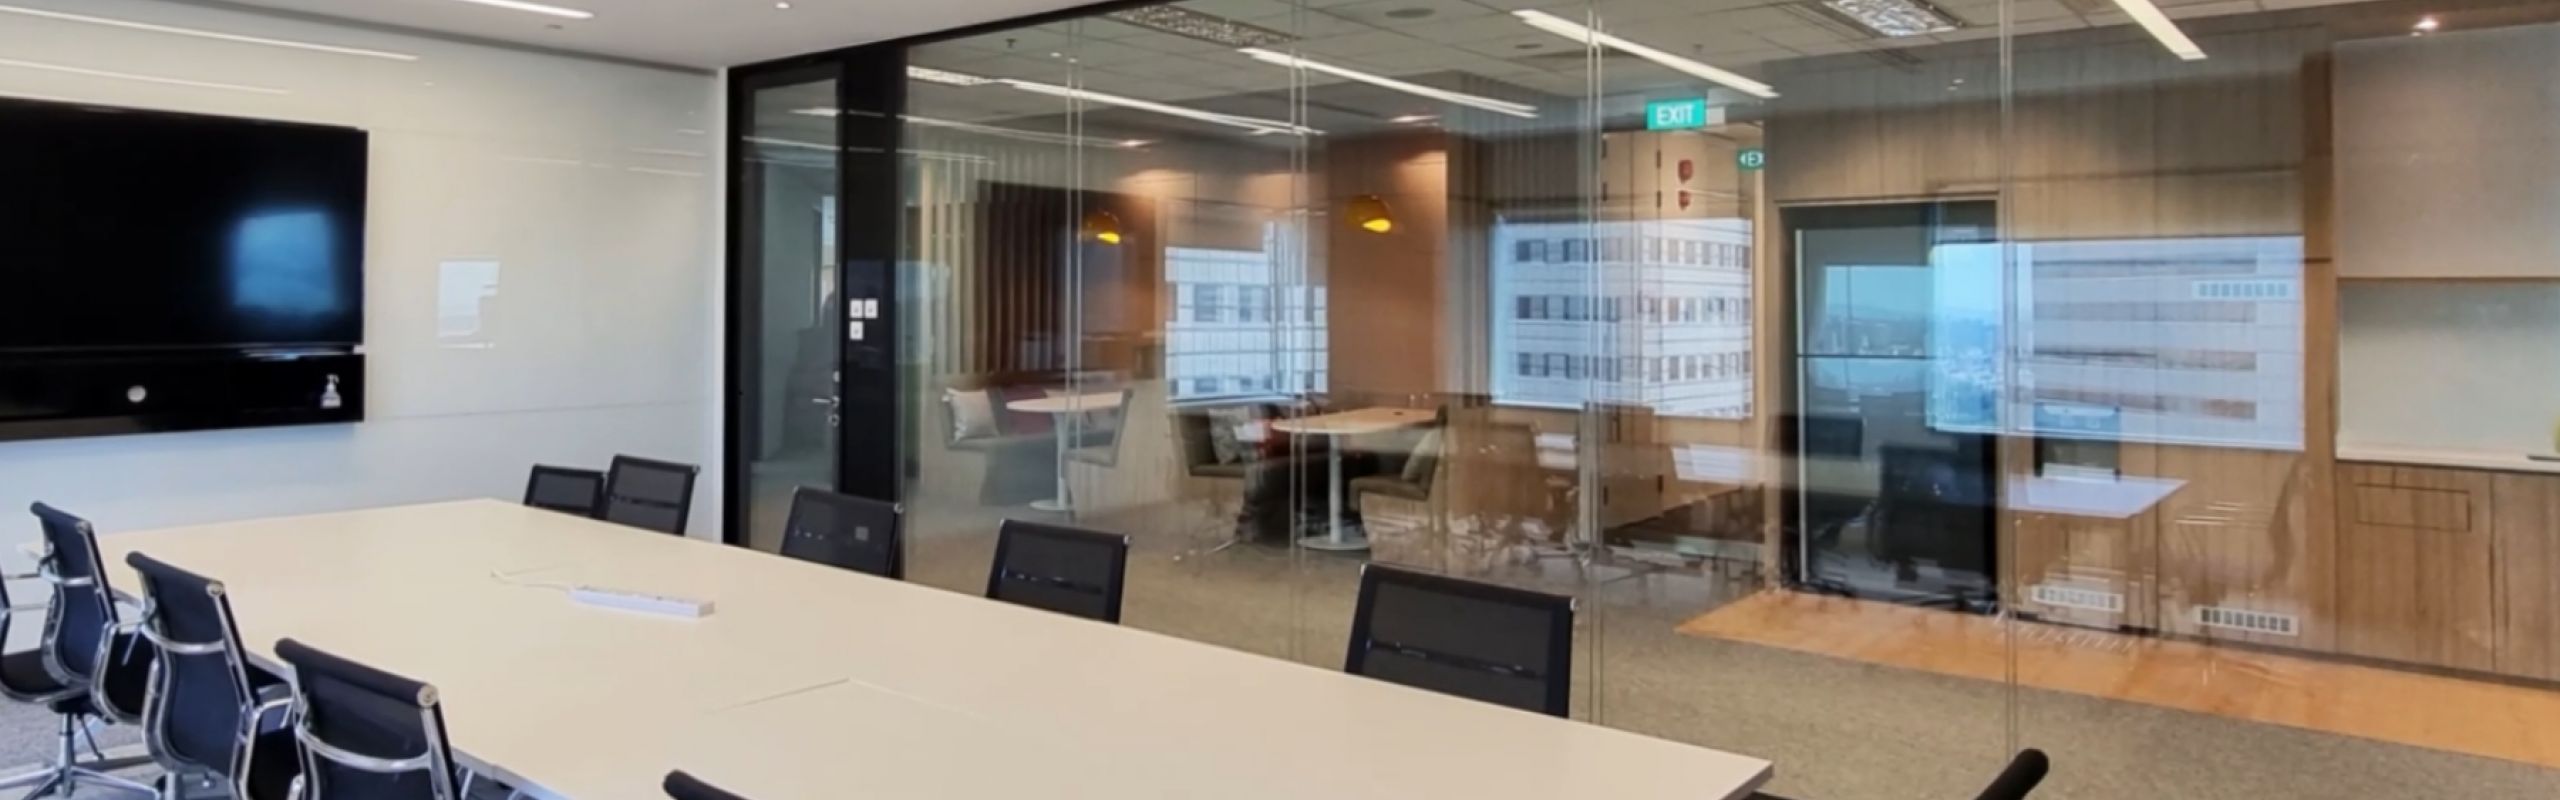 Create an Open and Fluid Workspace With Glass Partitions